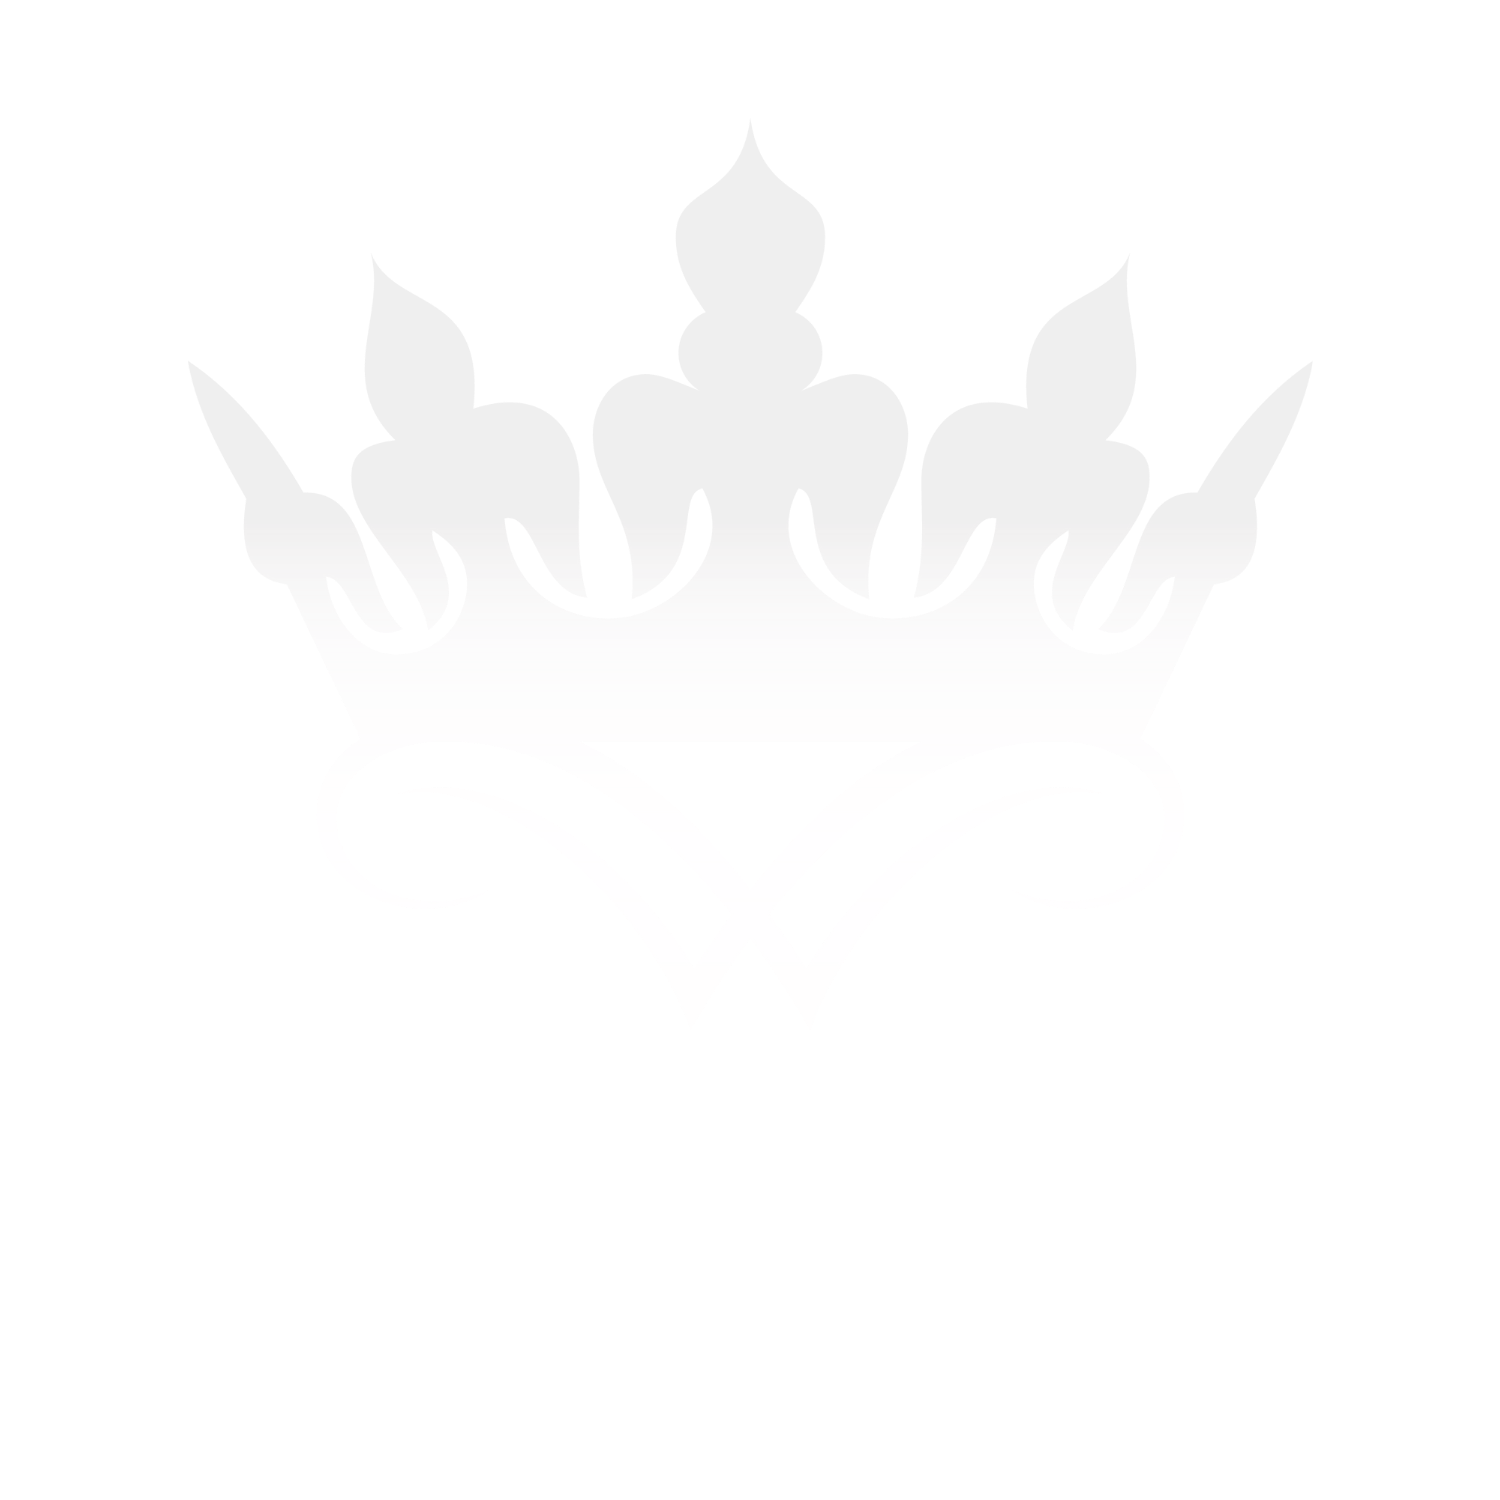 The Royalists